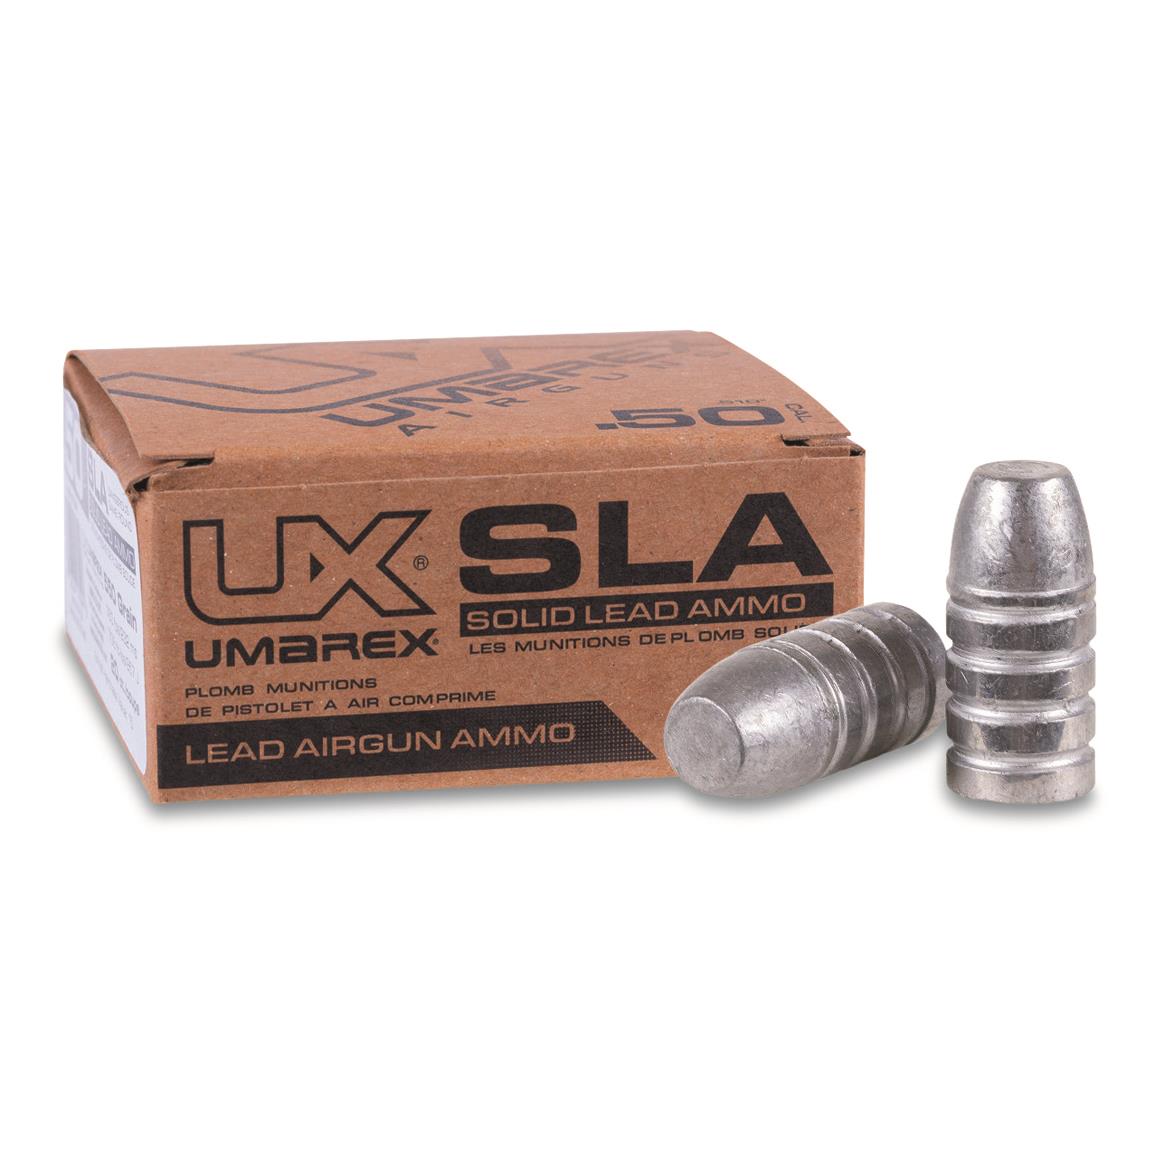 Umarex Solid Lead Ammo, .510/.50 cal., 550 Grain, 20 Rounds